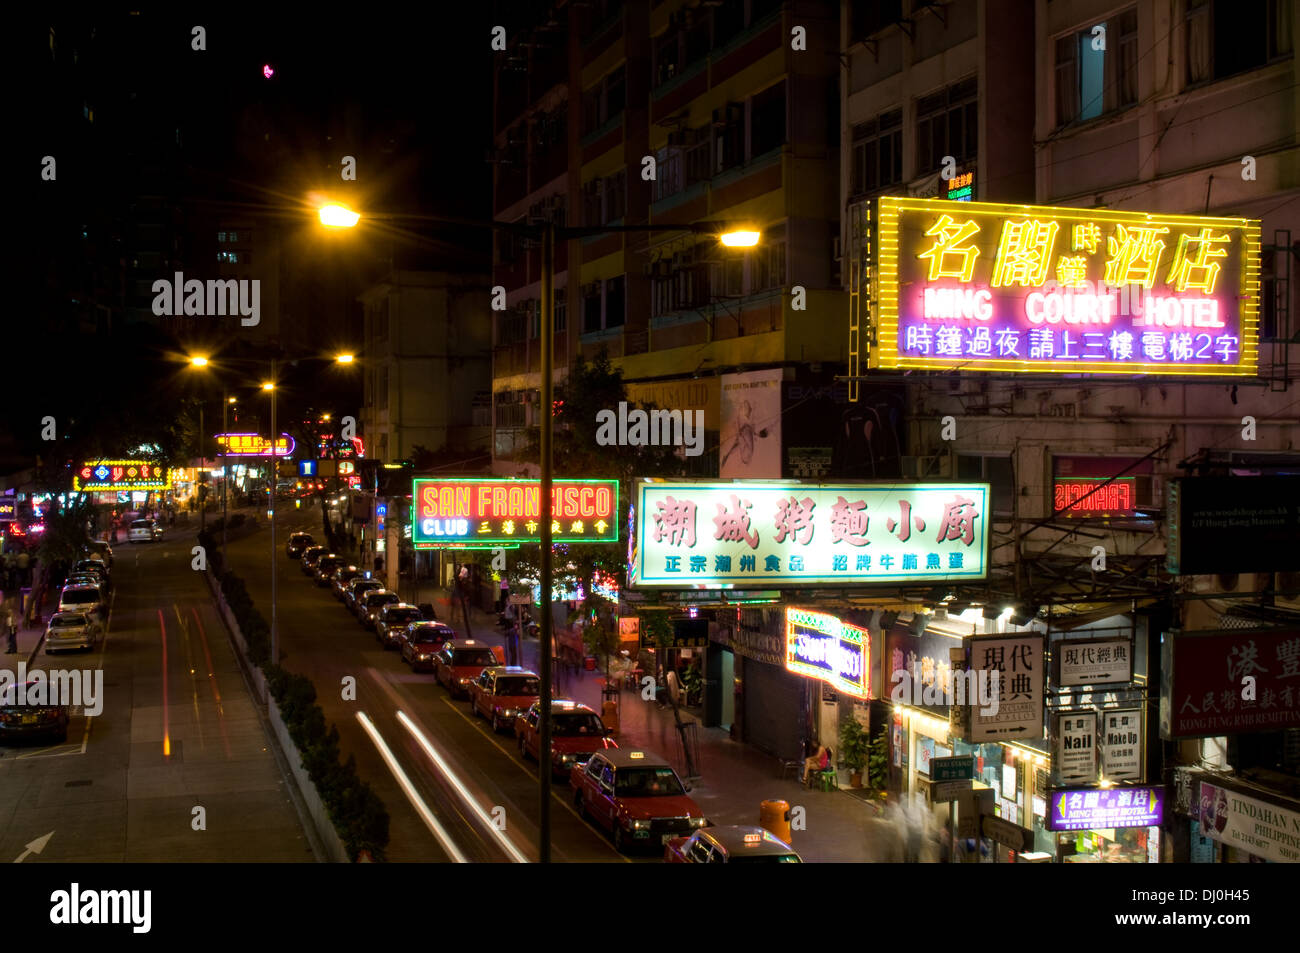 A line of taxis wait for customers outside clubs and hotels in Lockhart Road, Wan Chai District of Hong Kong Island at night Stock Photo